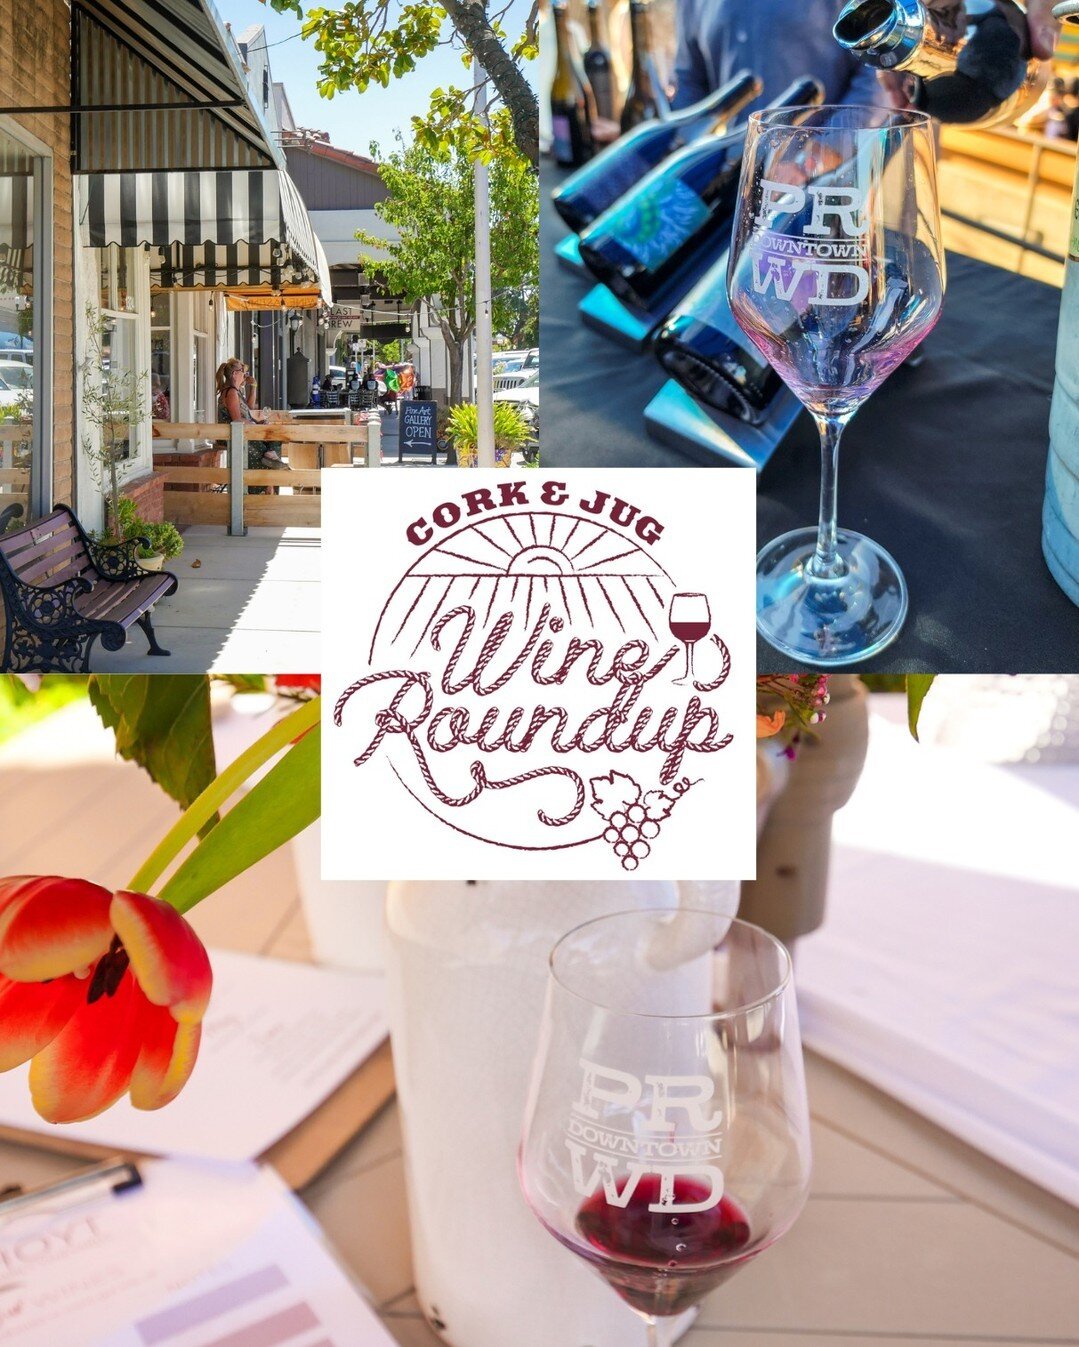 Get ready to discover Downtown Paso Robles, the beating heart of California's Central Coast wine country! This Memorial Day Weekend, wander our charming streets, lined with boutique shops and galleries, as the scent of coffee blends with the promise 